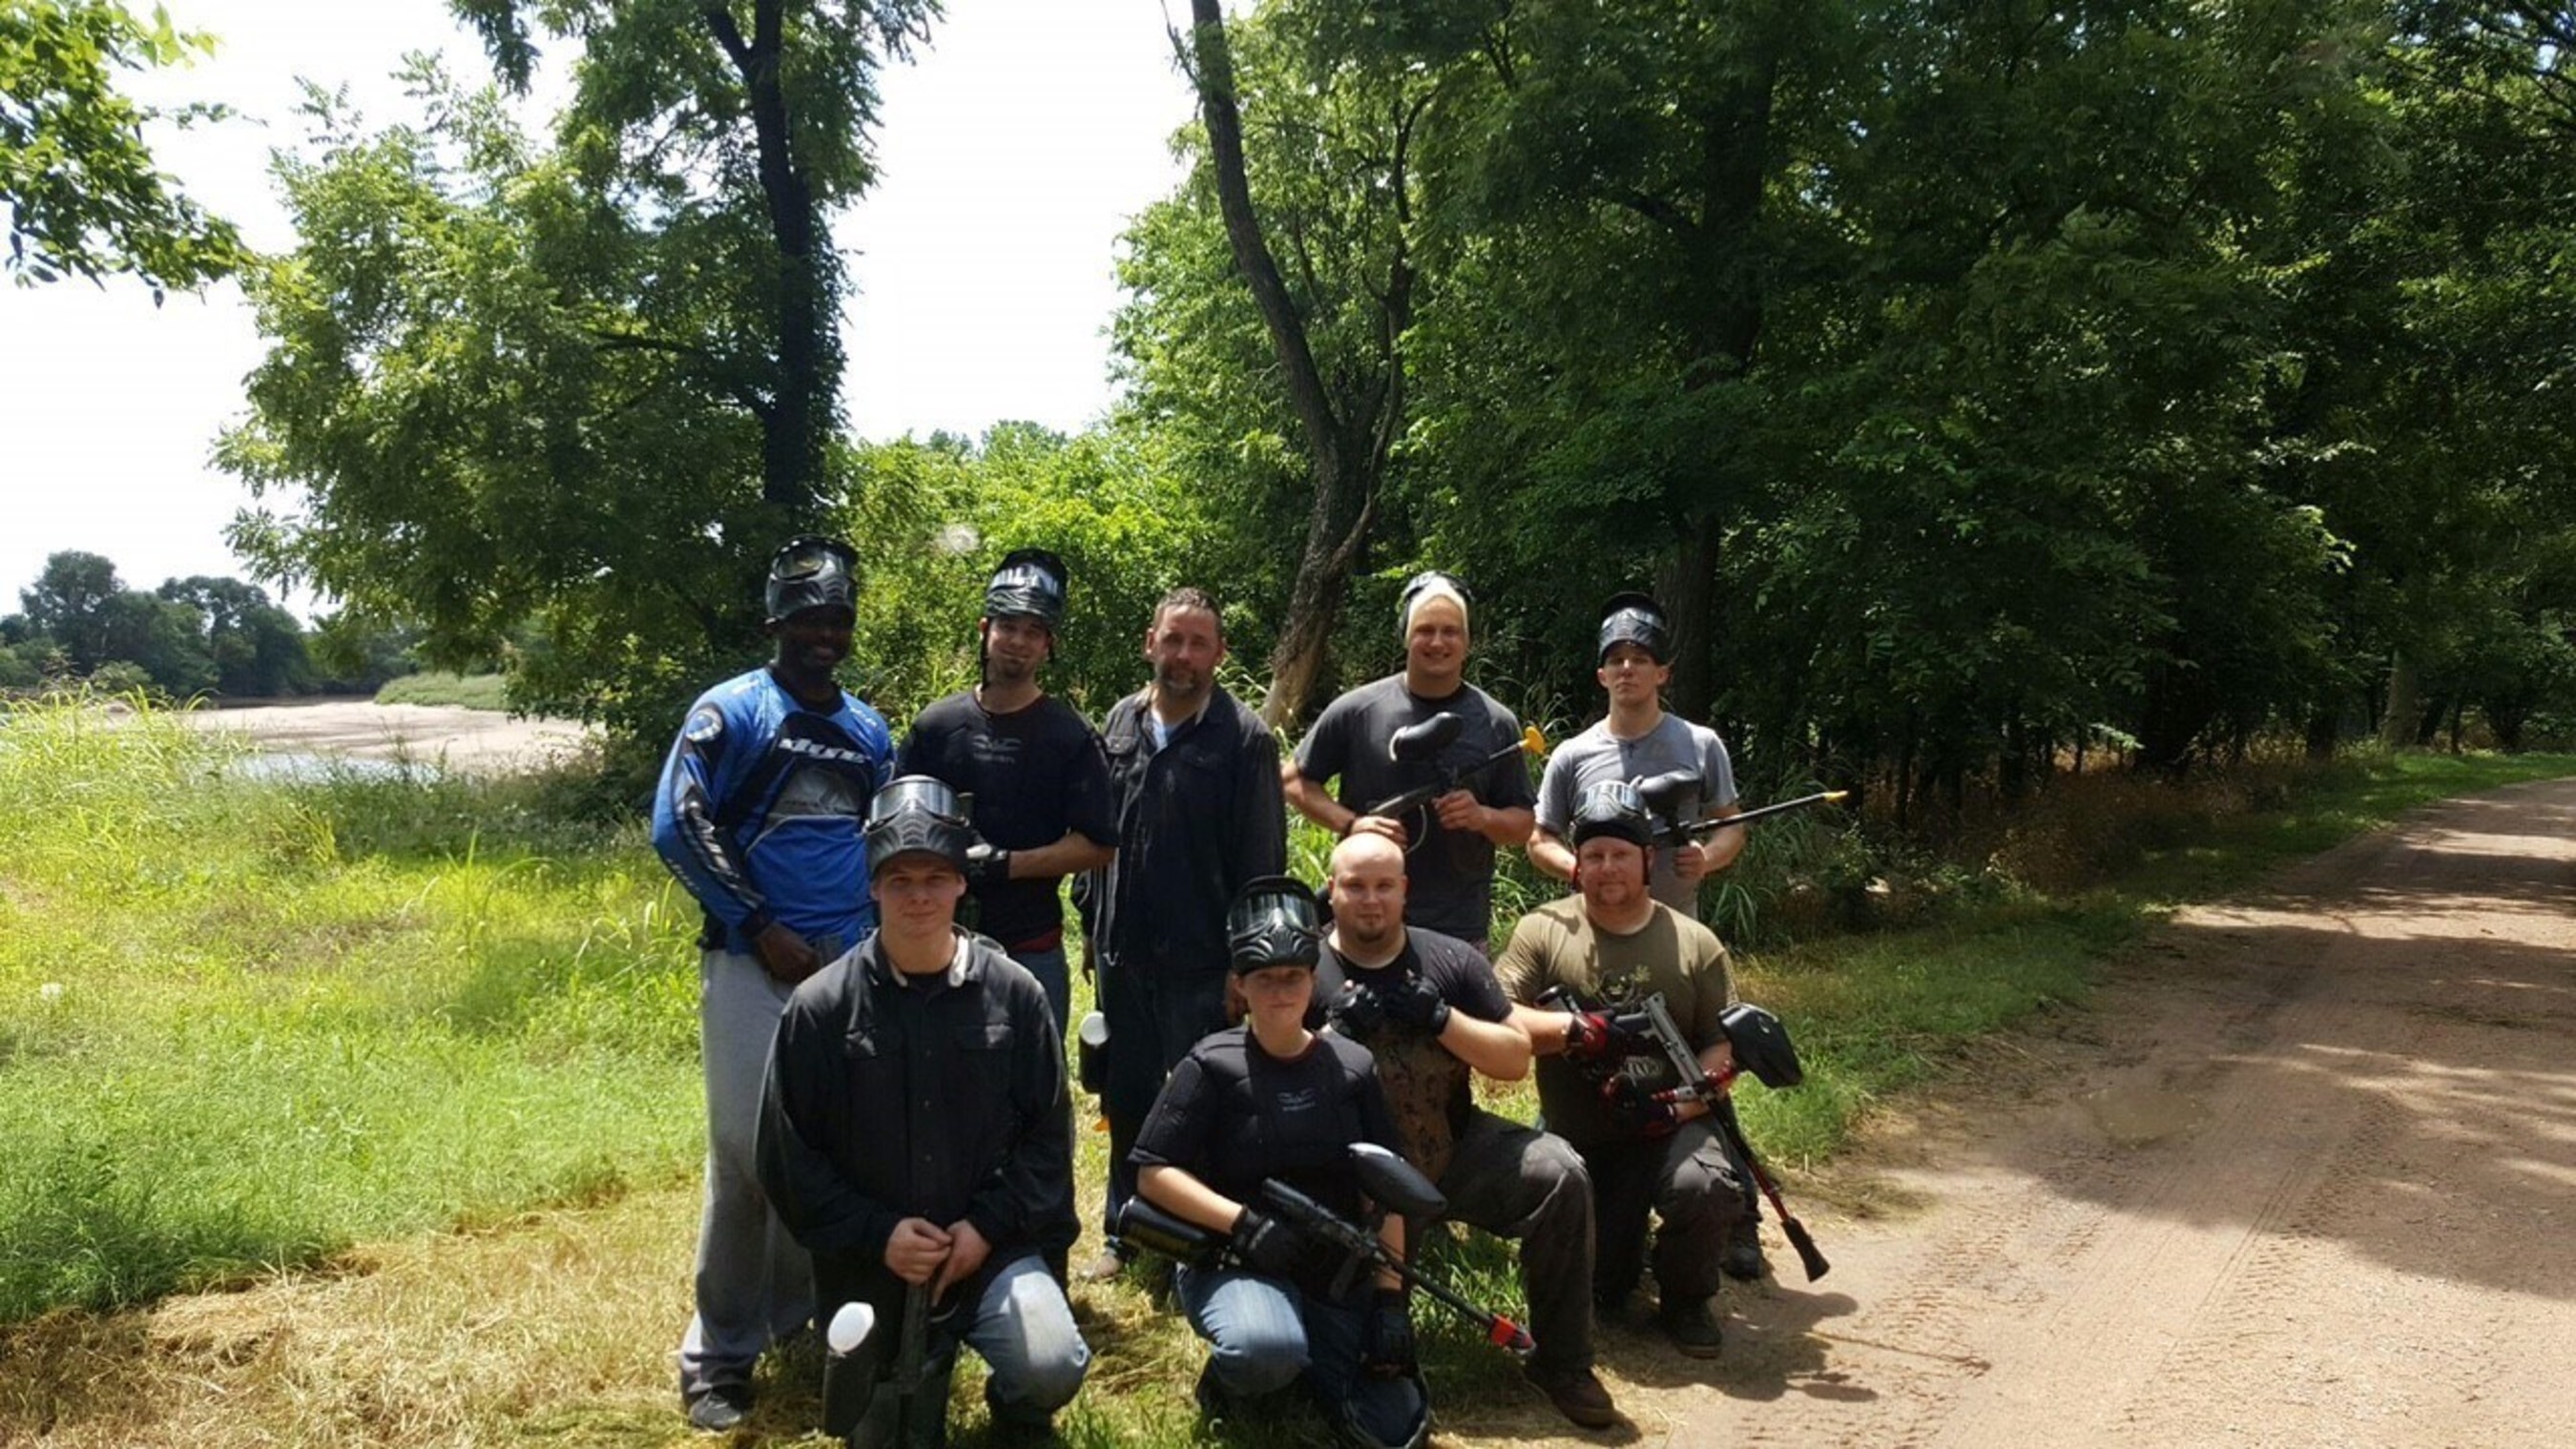 Local paintball enthusiasts were eager to include WWP veterans during their paintball sessions.